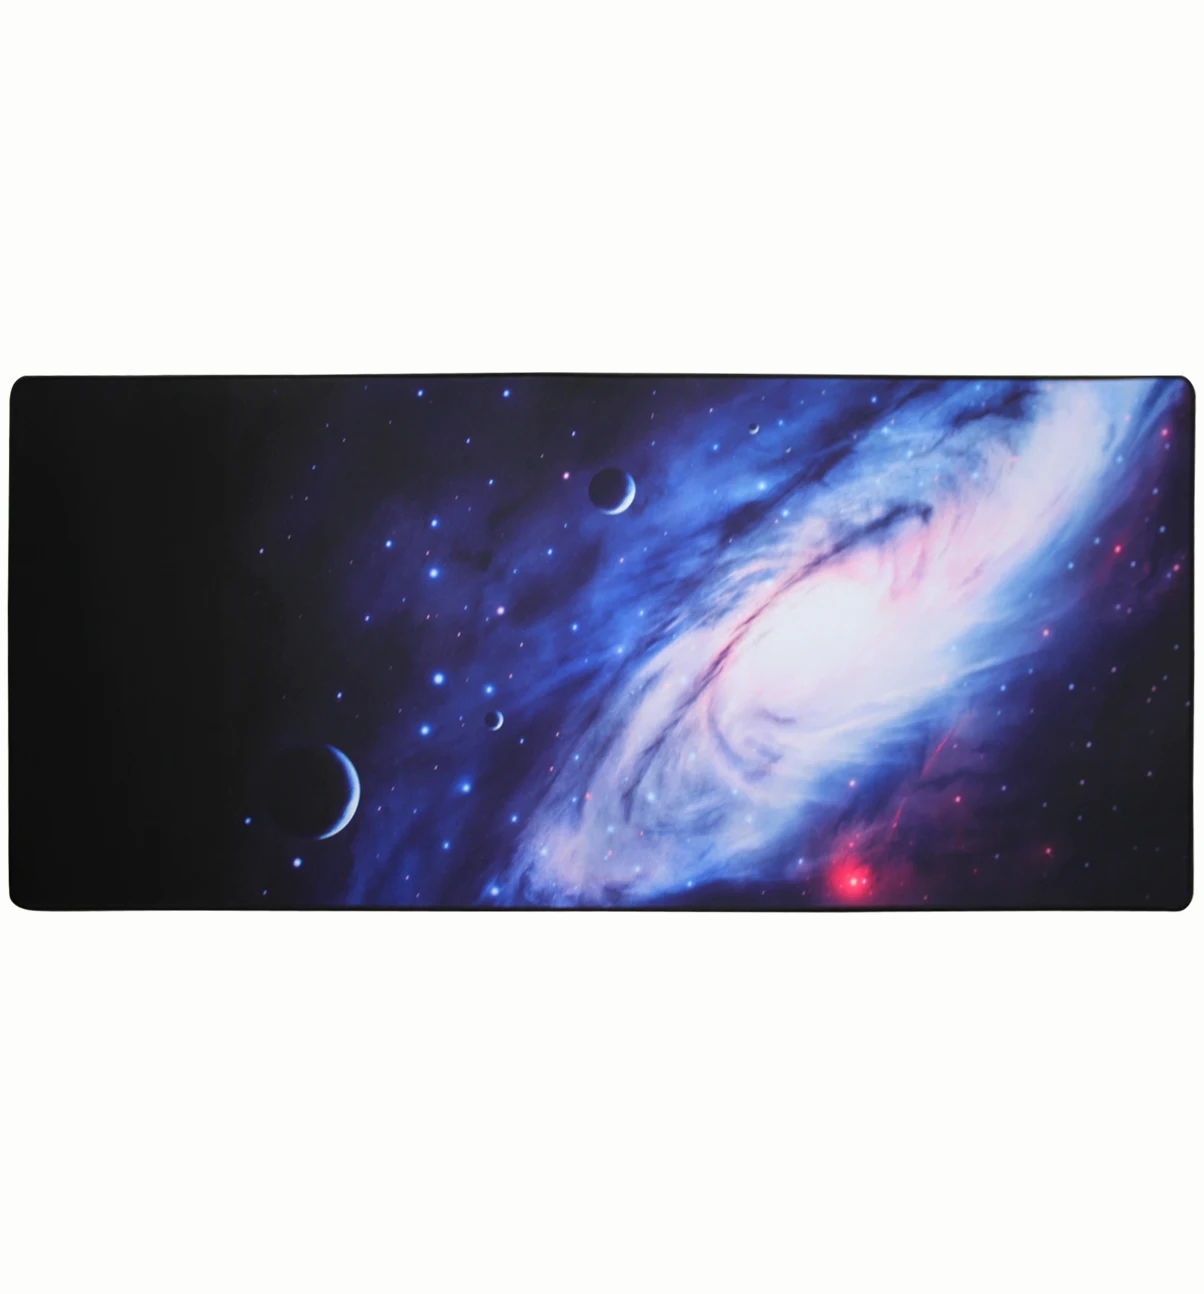 

hot sell spot Custom Printed Mouse Mat Personalized Photo Large big Interstellar Gaming extended mouse pad, All colors is available